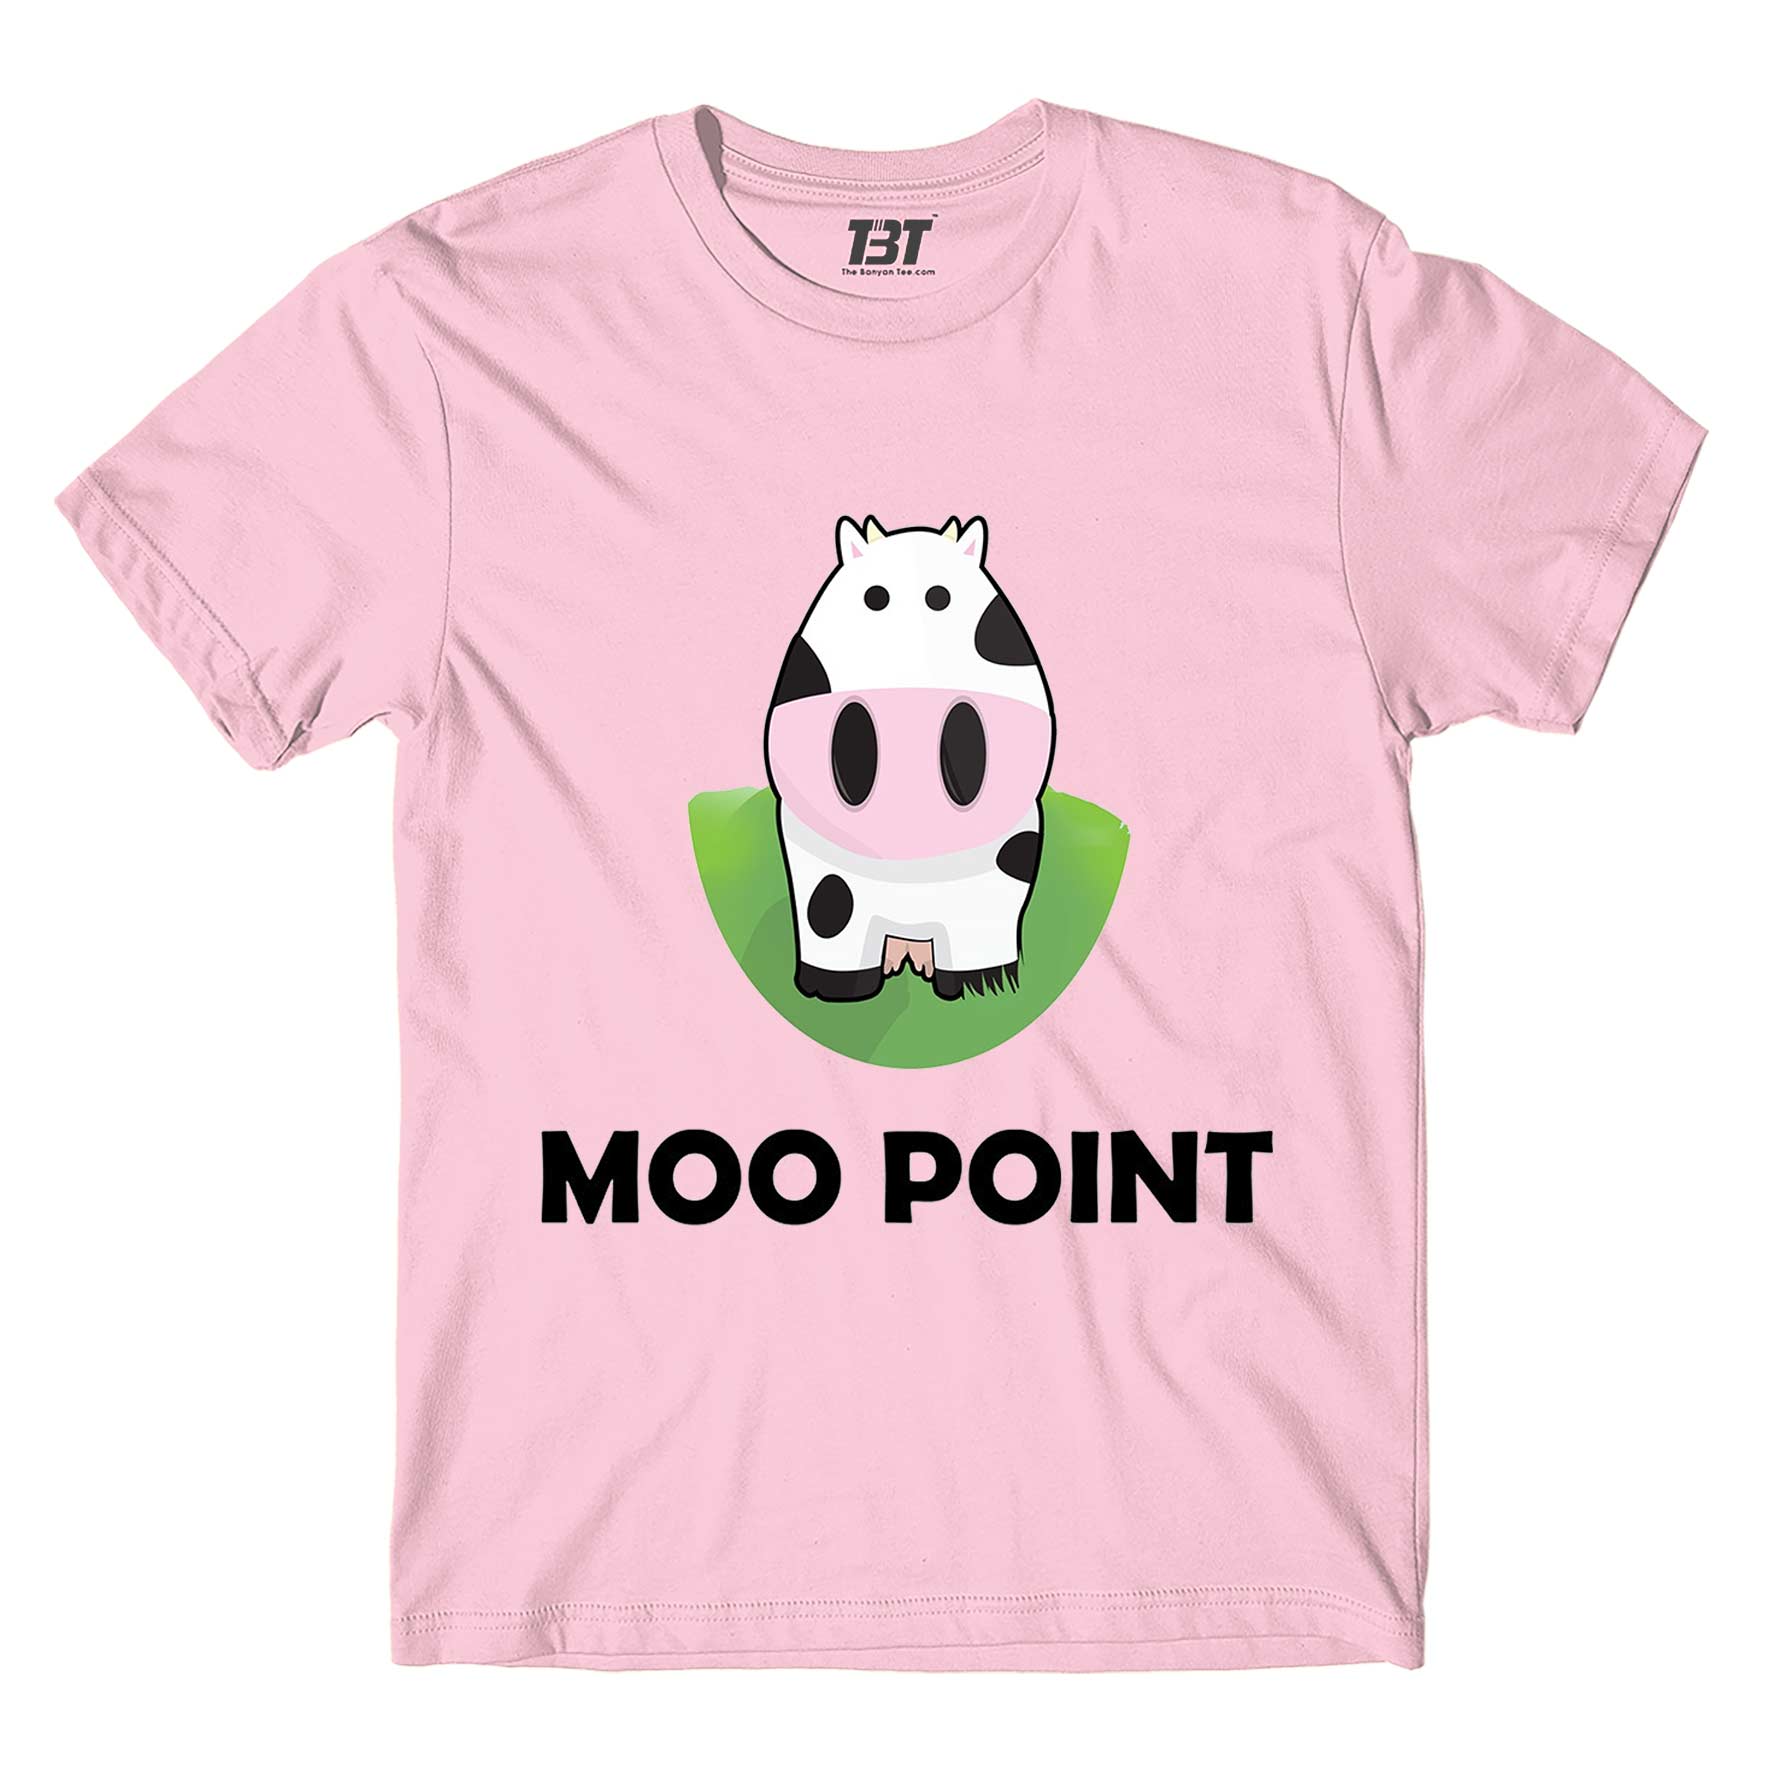 Friends T-shirt - Moo Point by The Banyan Tee TBT